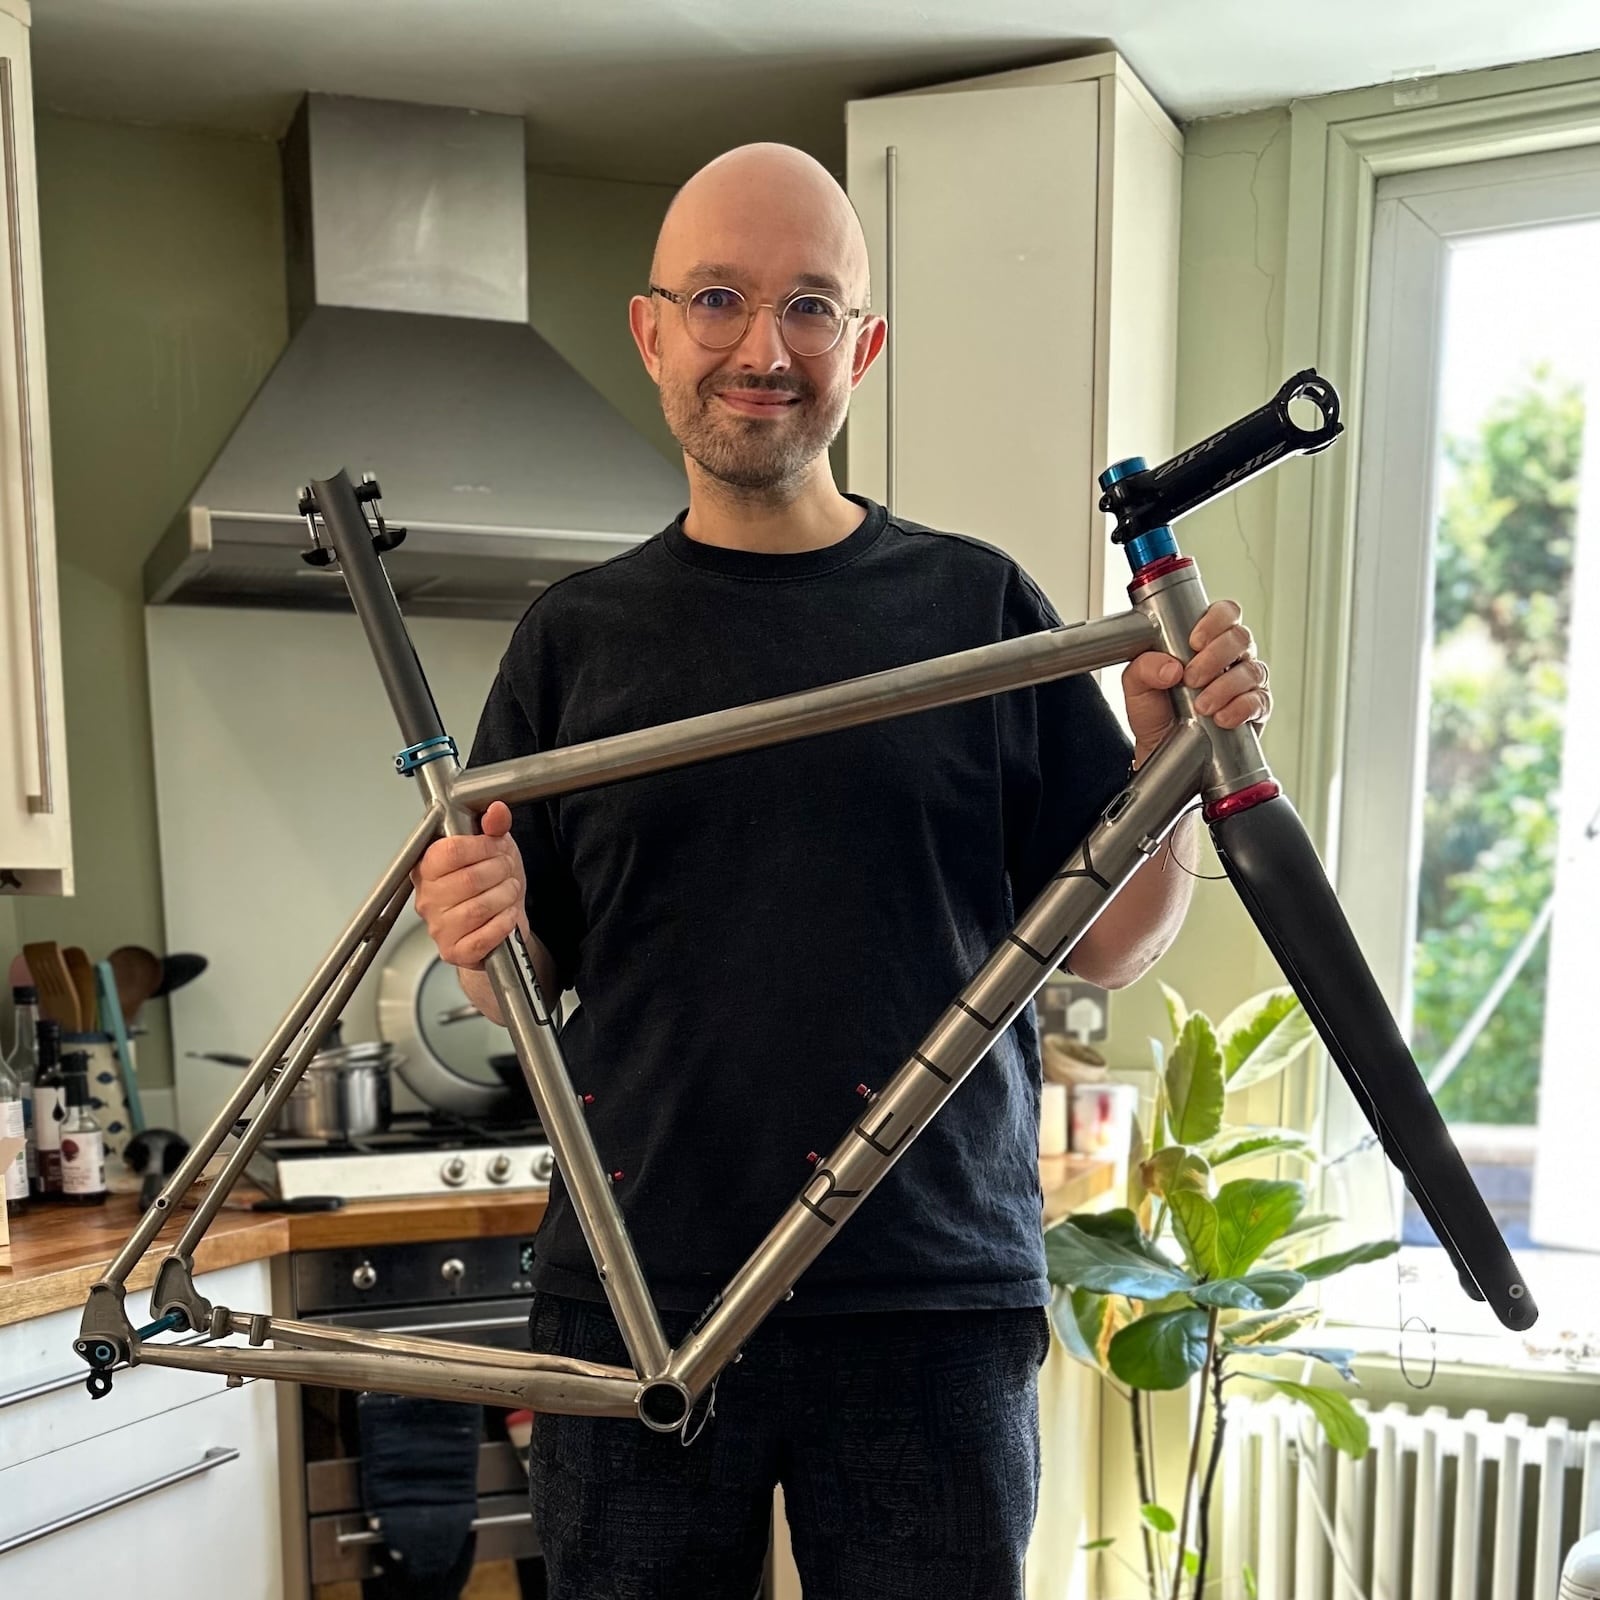 A photo of the author in his kitchen holding up a raod bike frameset and smiling